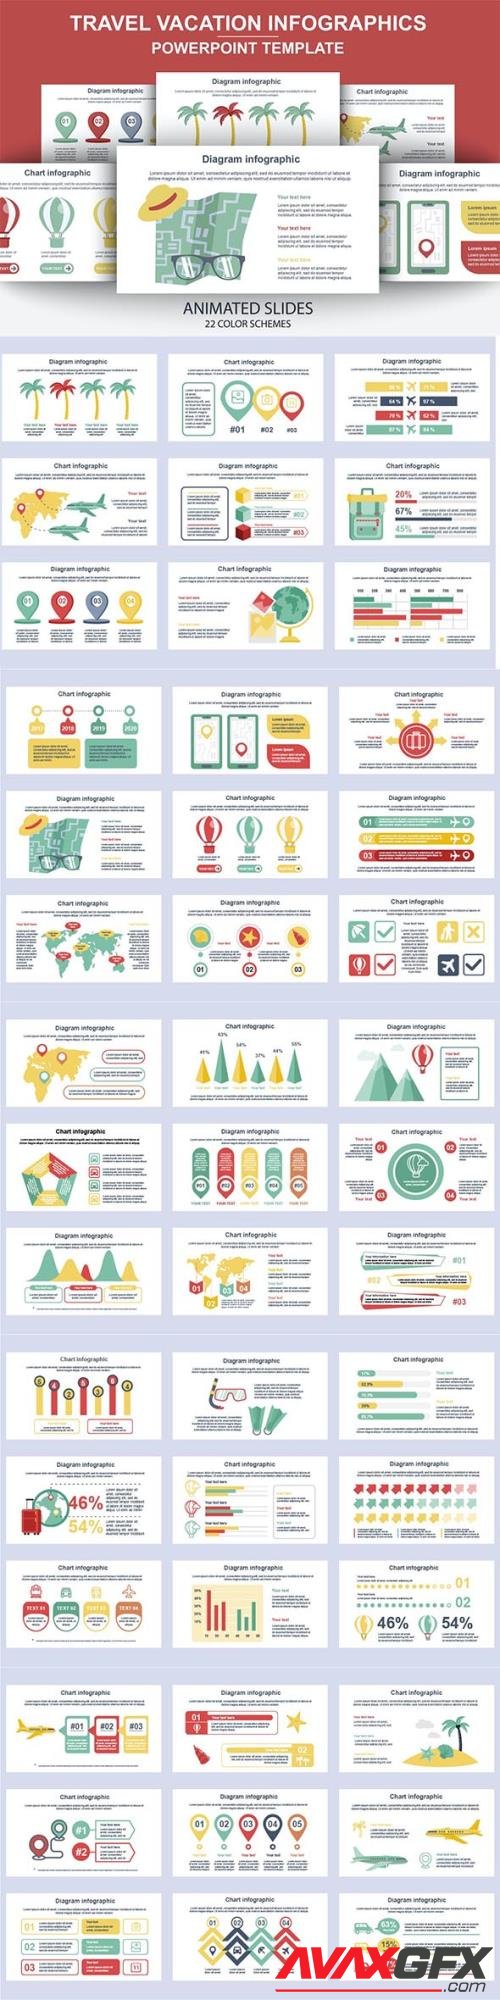 Travel Infographics Powerpoint Animated Slides 4FUY6WX